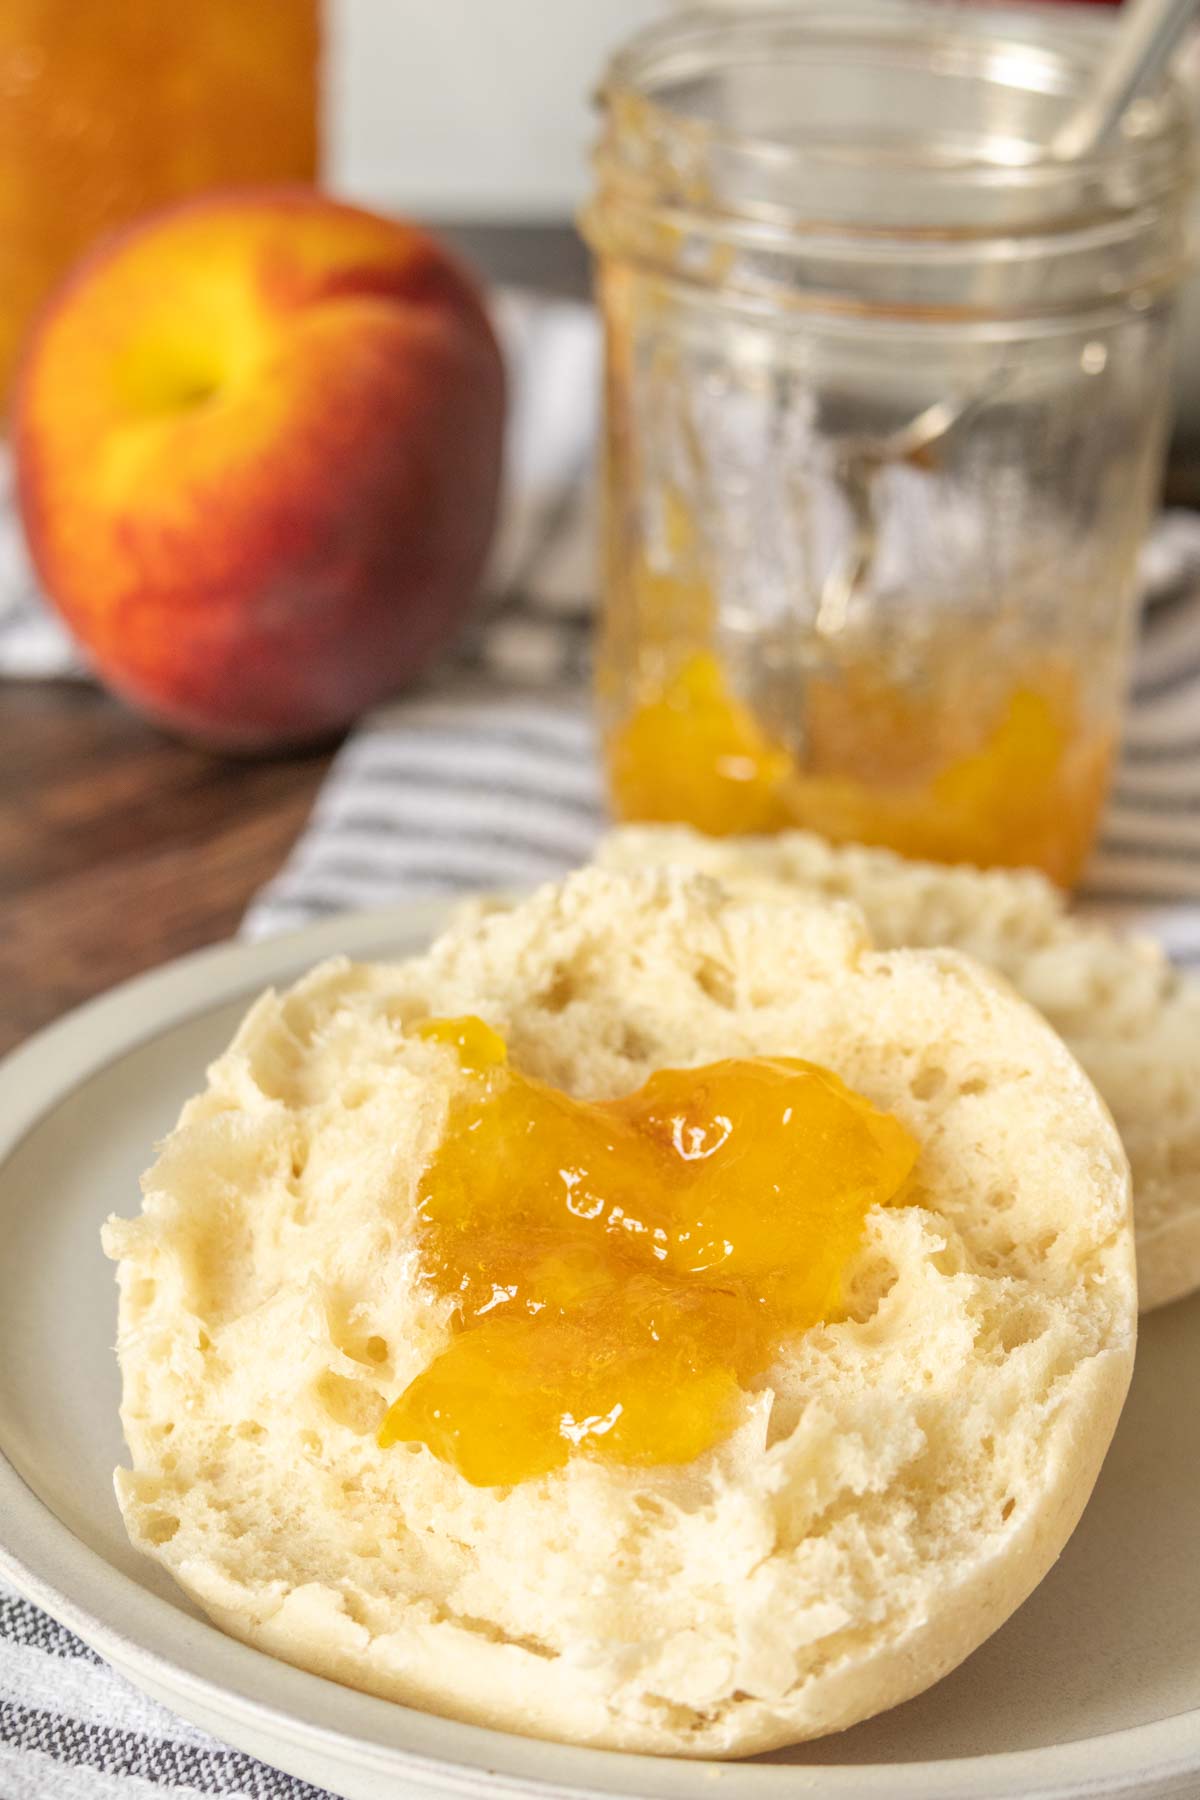 Split English muffin on a plate with a dollop of peach jam on top.